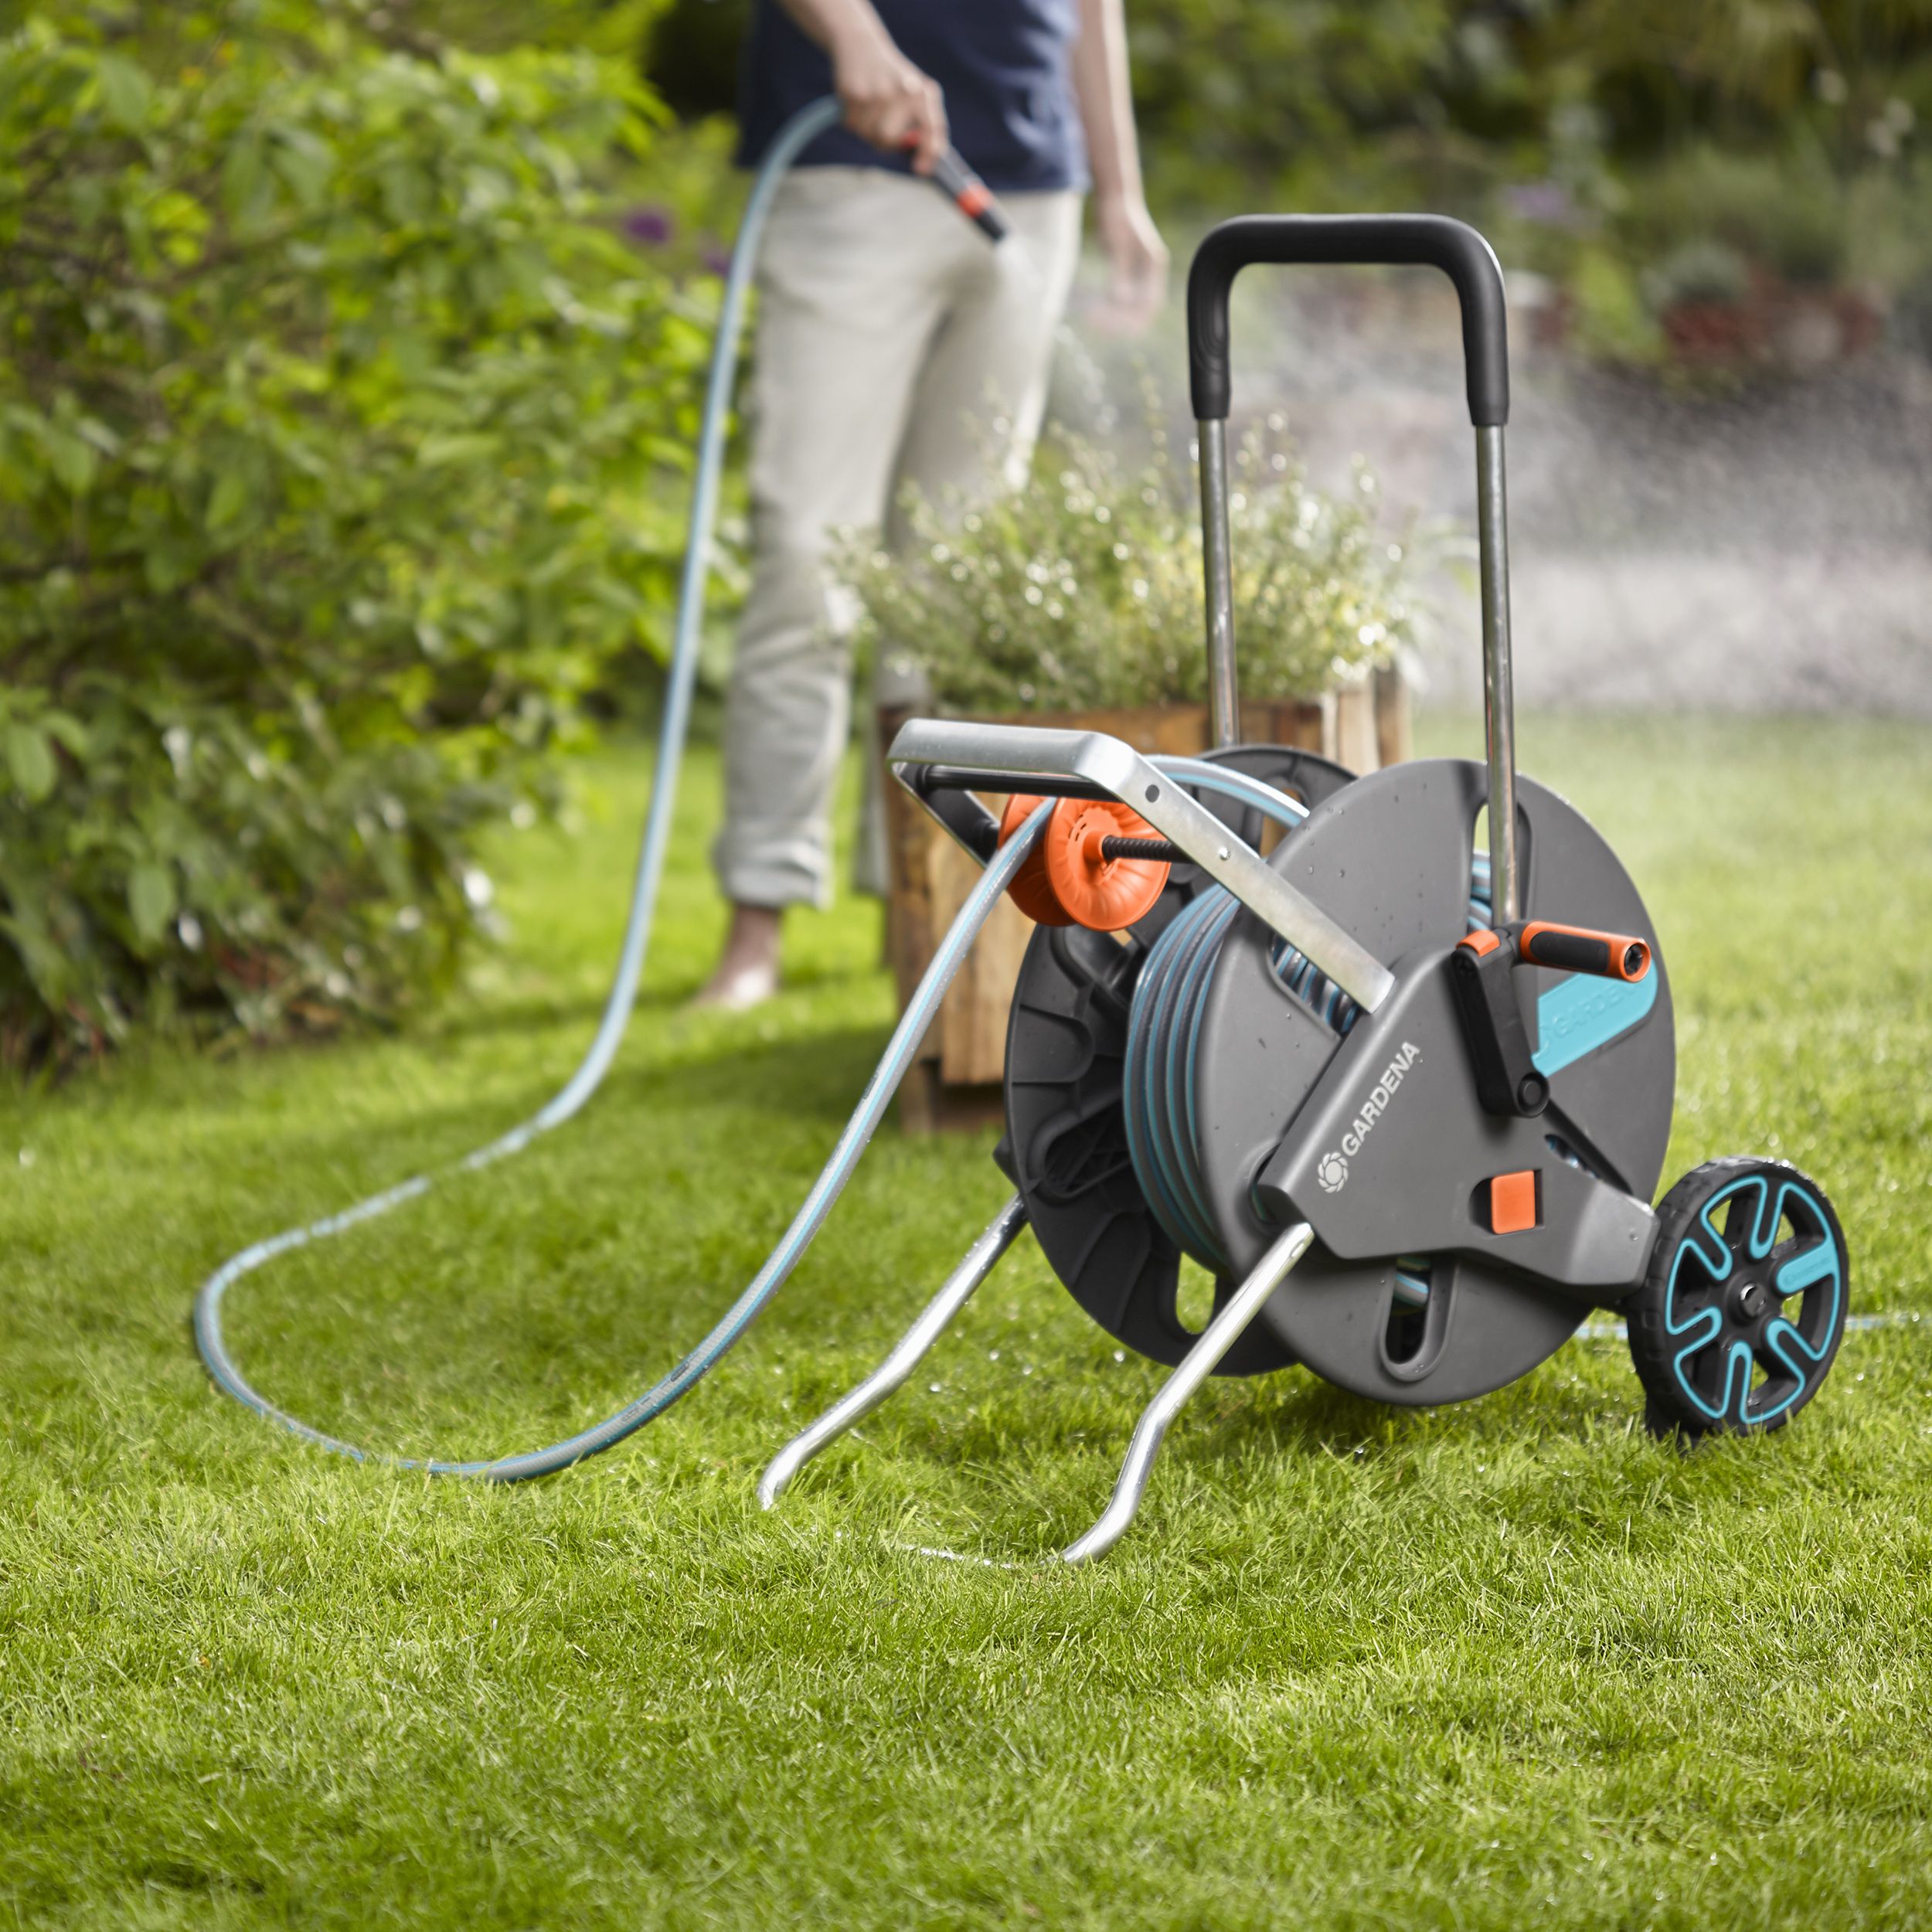 GARDENA - 💦𝗦𝗽𝗮𝗰𝗲 𝘀𝗮𝘃𝗶𝗻𝗴, 𝗰𝗼𝗻𝘃𝗲𝗻𝗶𝗲𝗻𝘁 𝘄𝗮𝘁𝗲𝗿𝗶𝗻𝗴  🛒: GARDENA Classic Hose Reel 10 Set provides  everything you need for convenient watering. Effortlessly roll up the garden  h